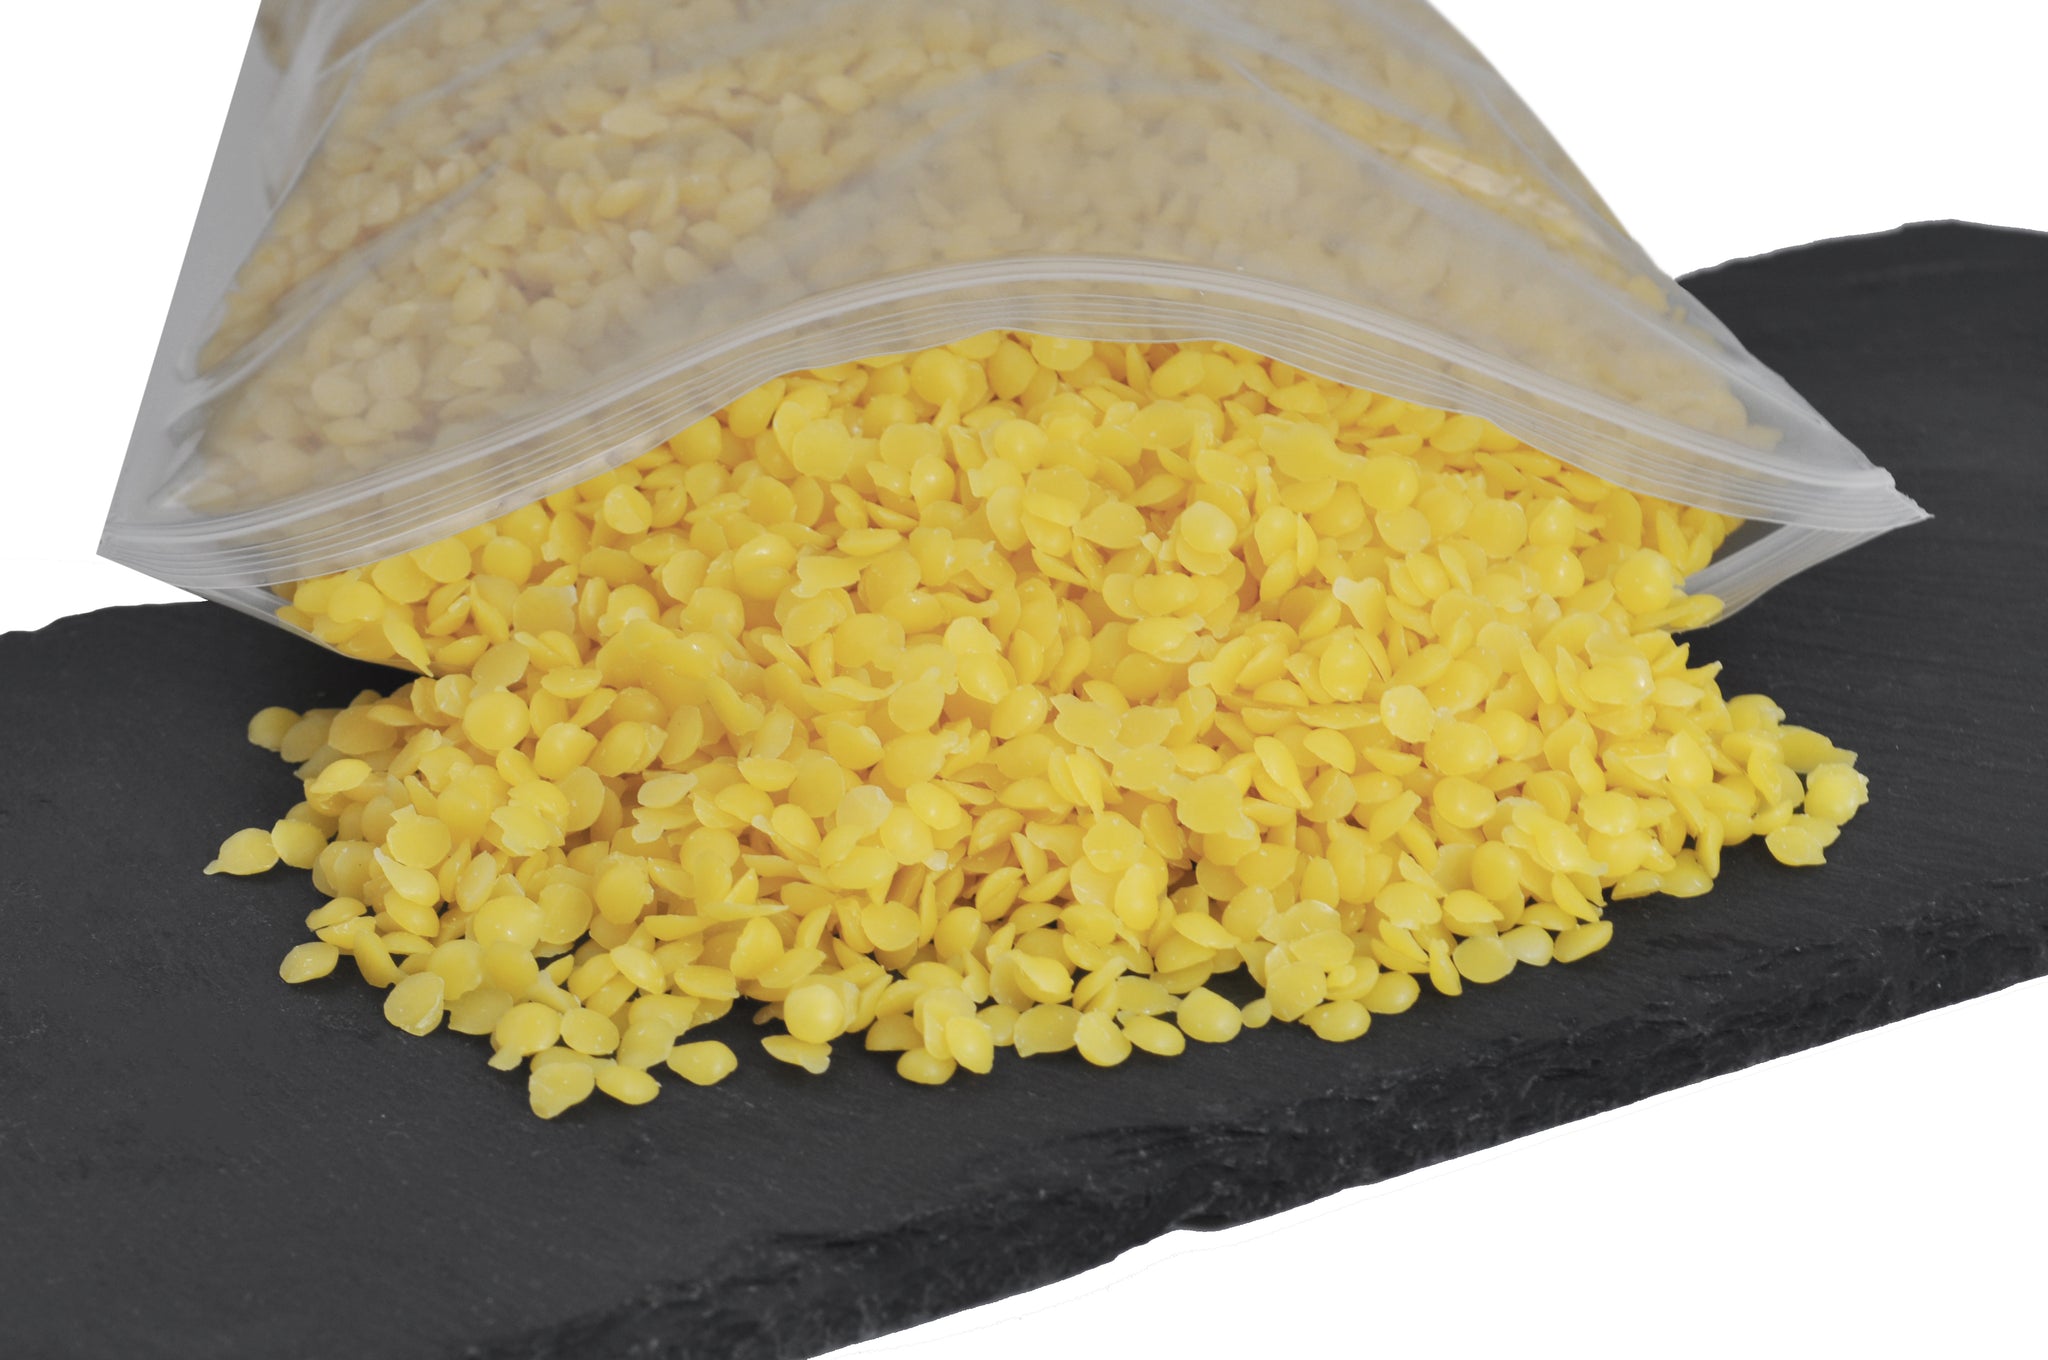 Beeswax Pellets - Pure unbleached chemical free beeswax